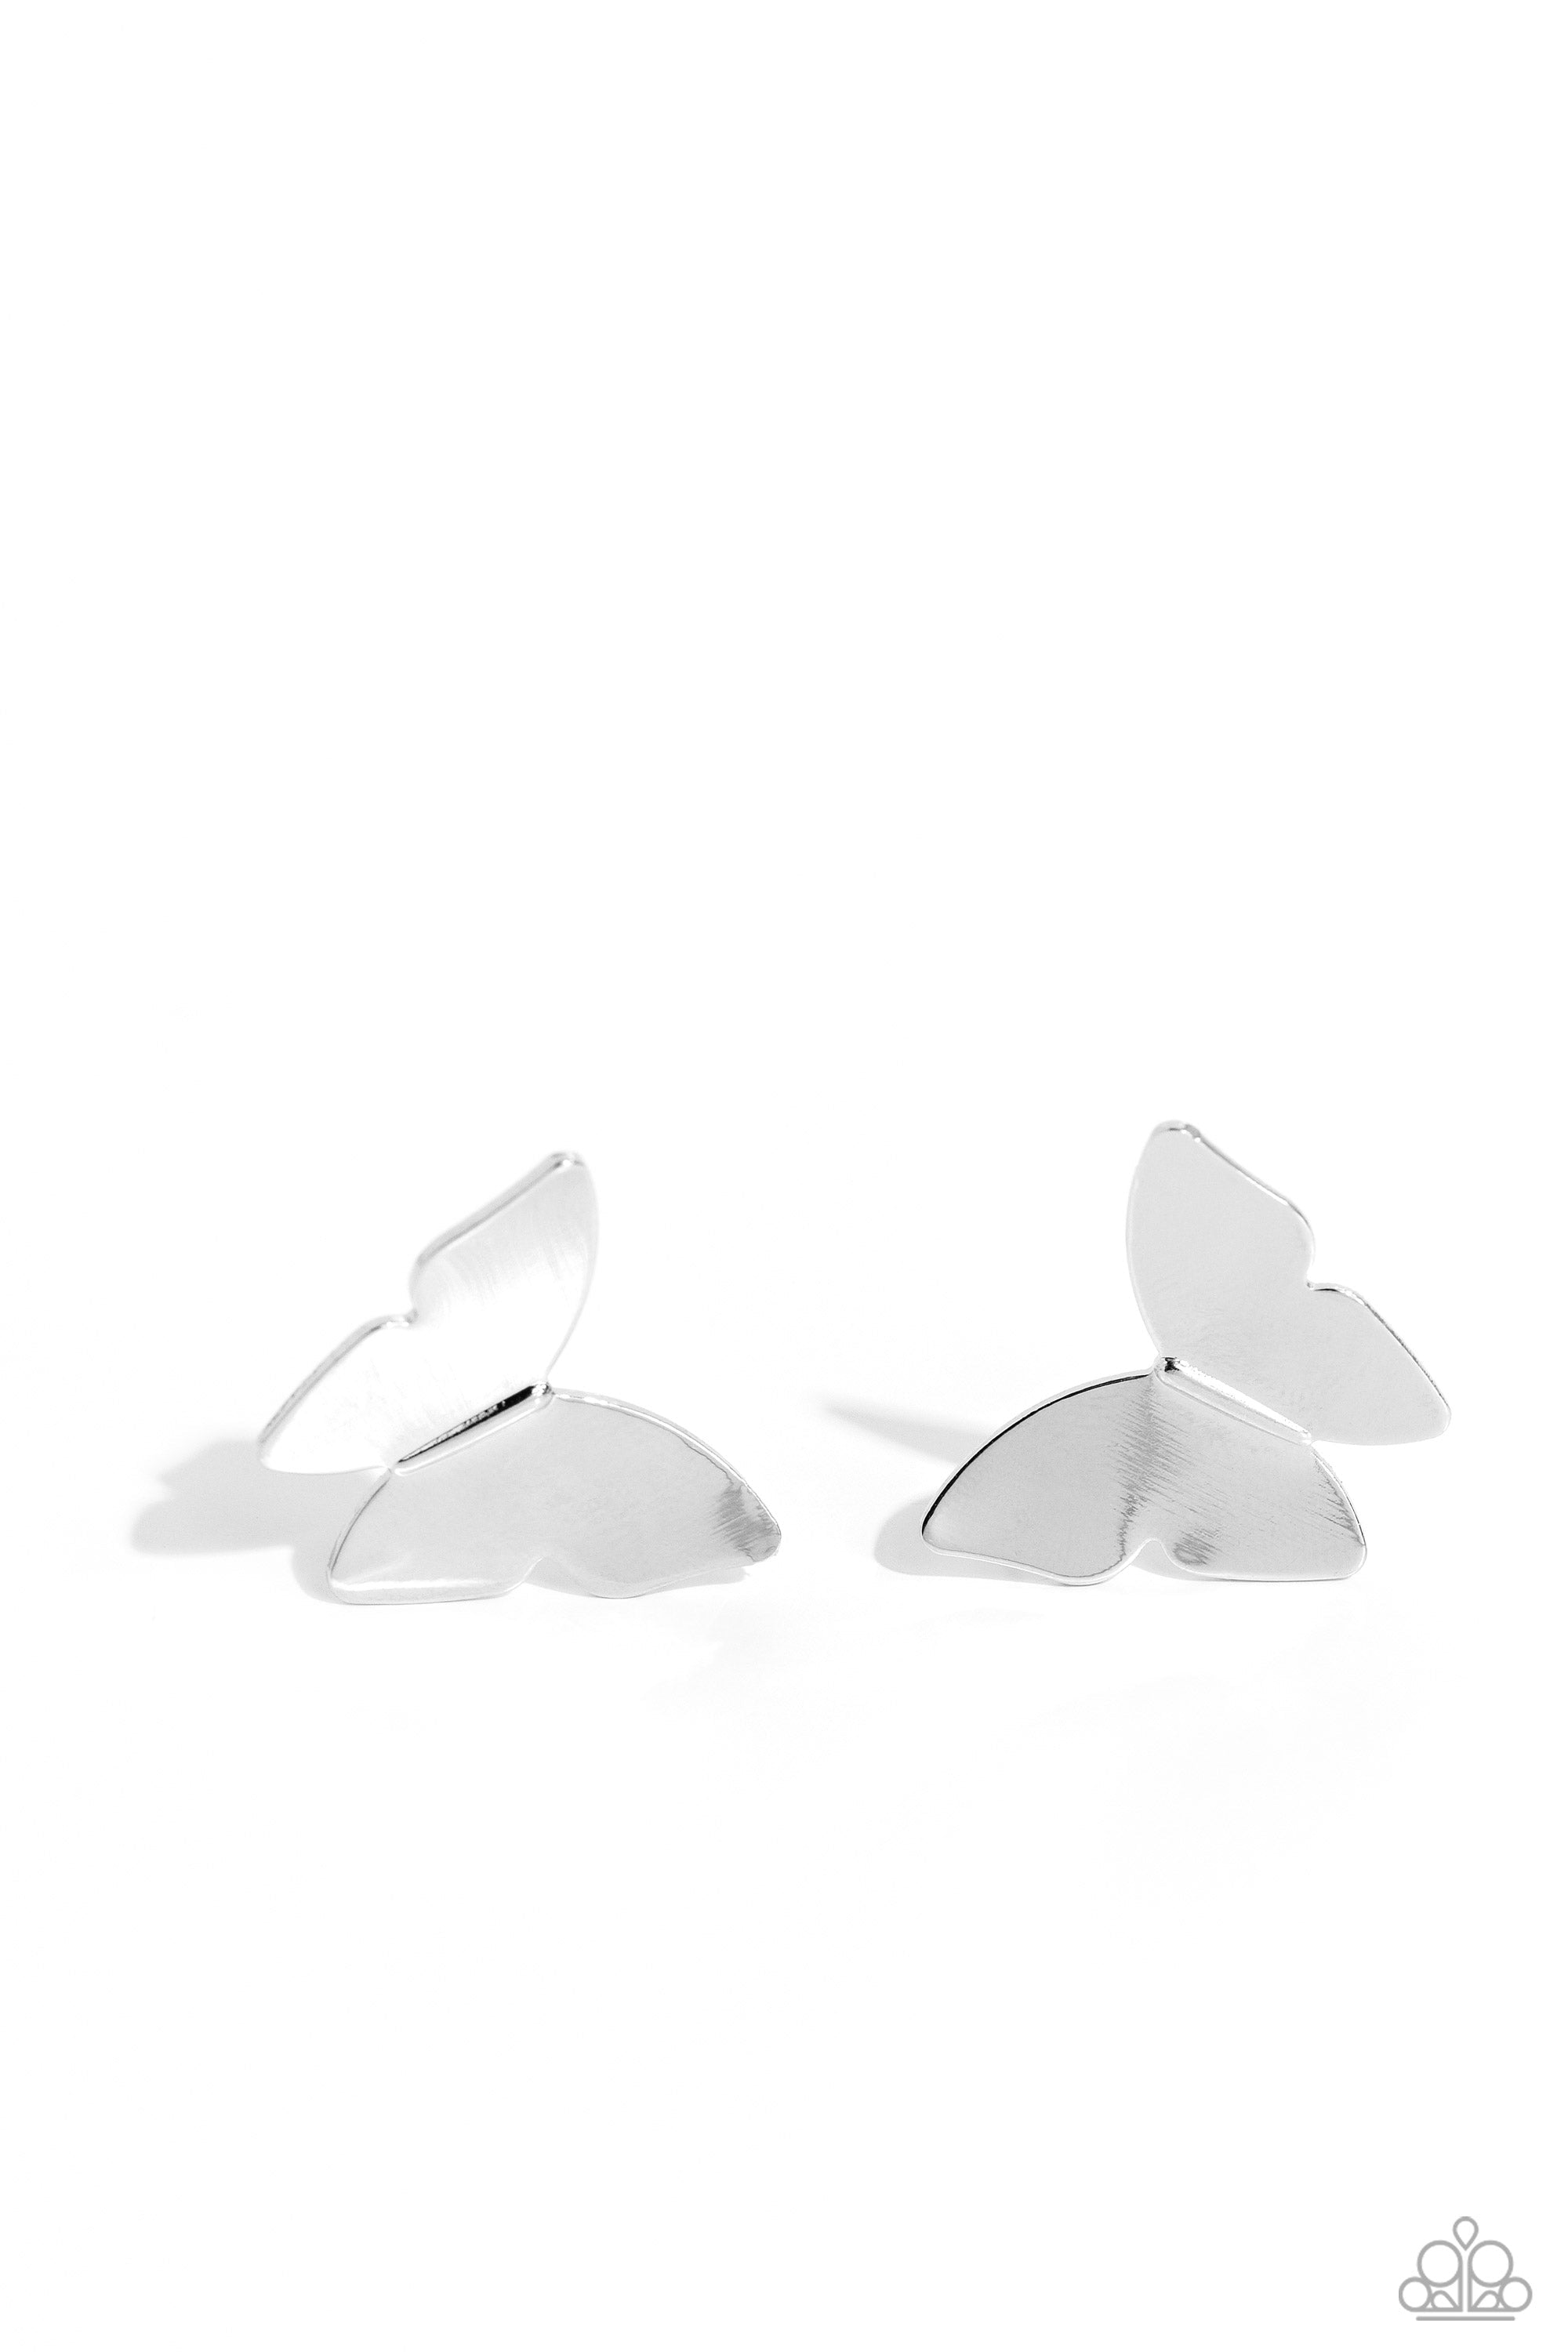 Butterfly Beholder Silver Post Earrings - Paparazzi Accessories- lightbox - CarasShop.com - $5 Jewelry by Cara Jewels